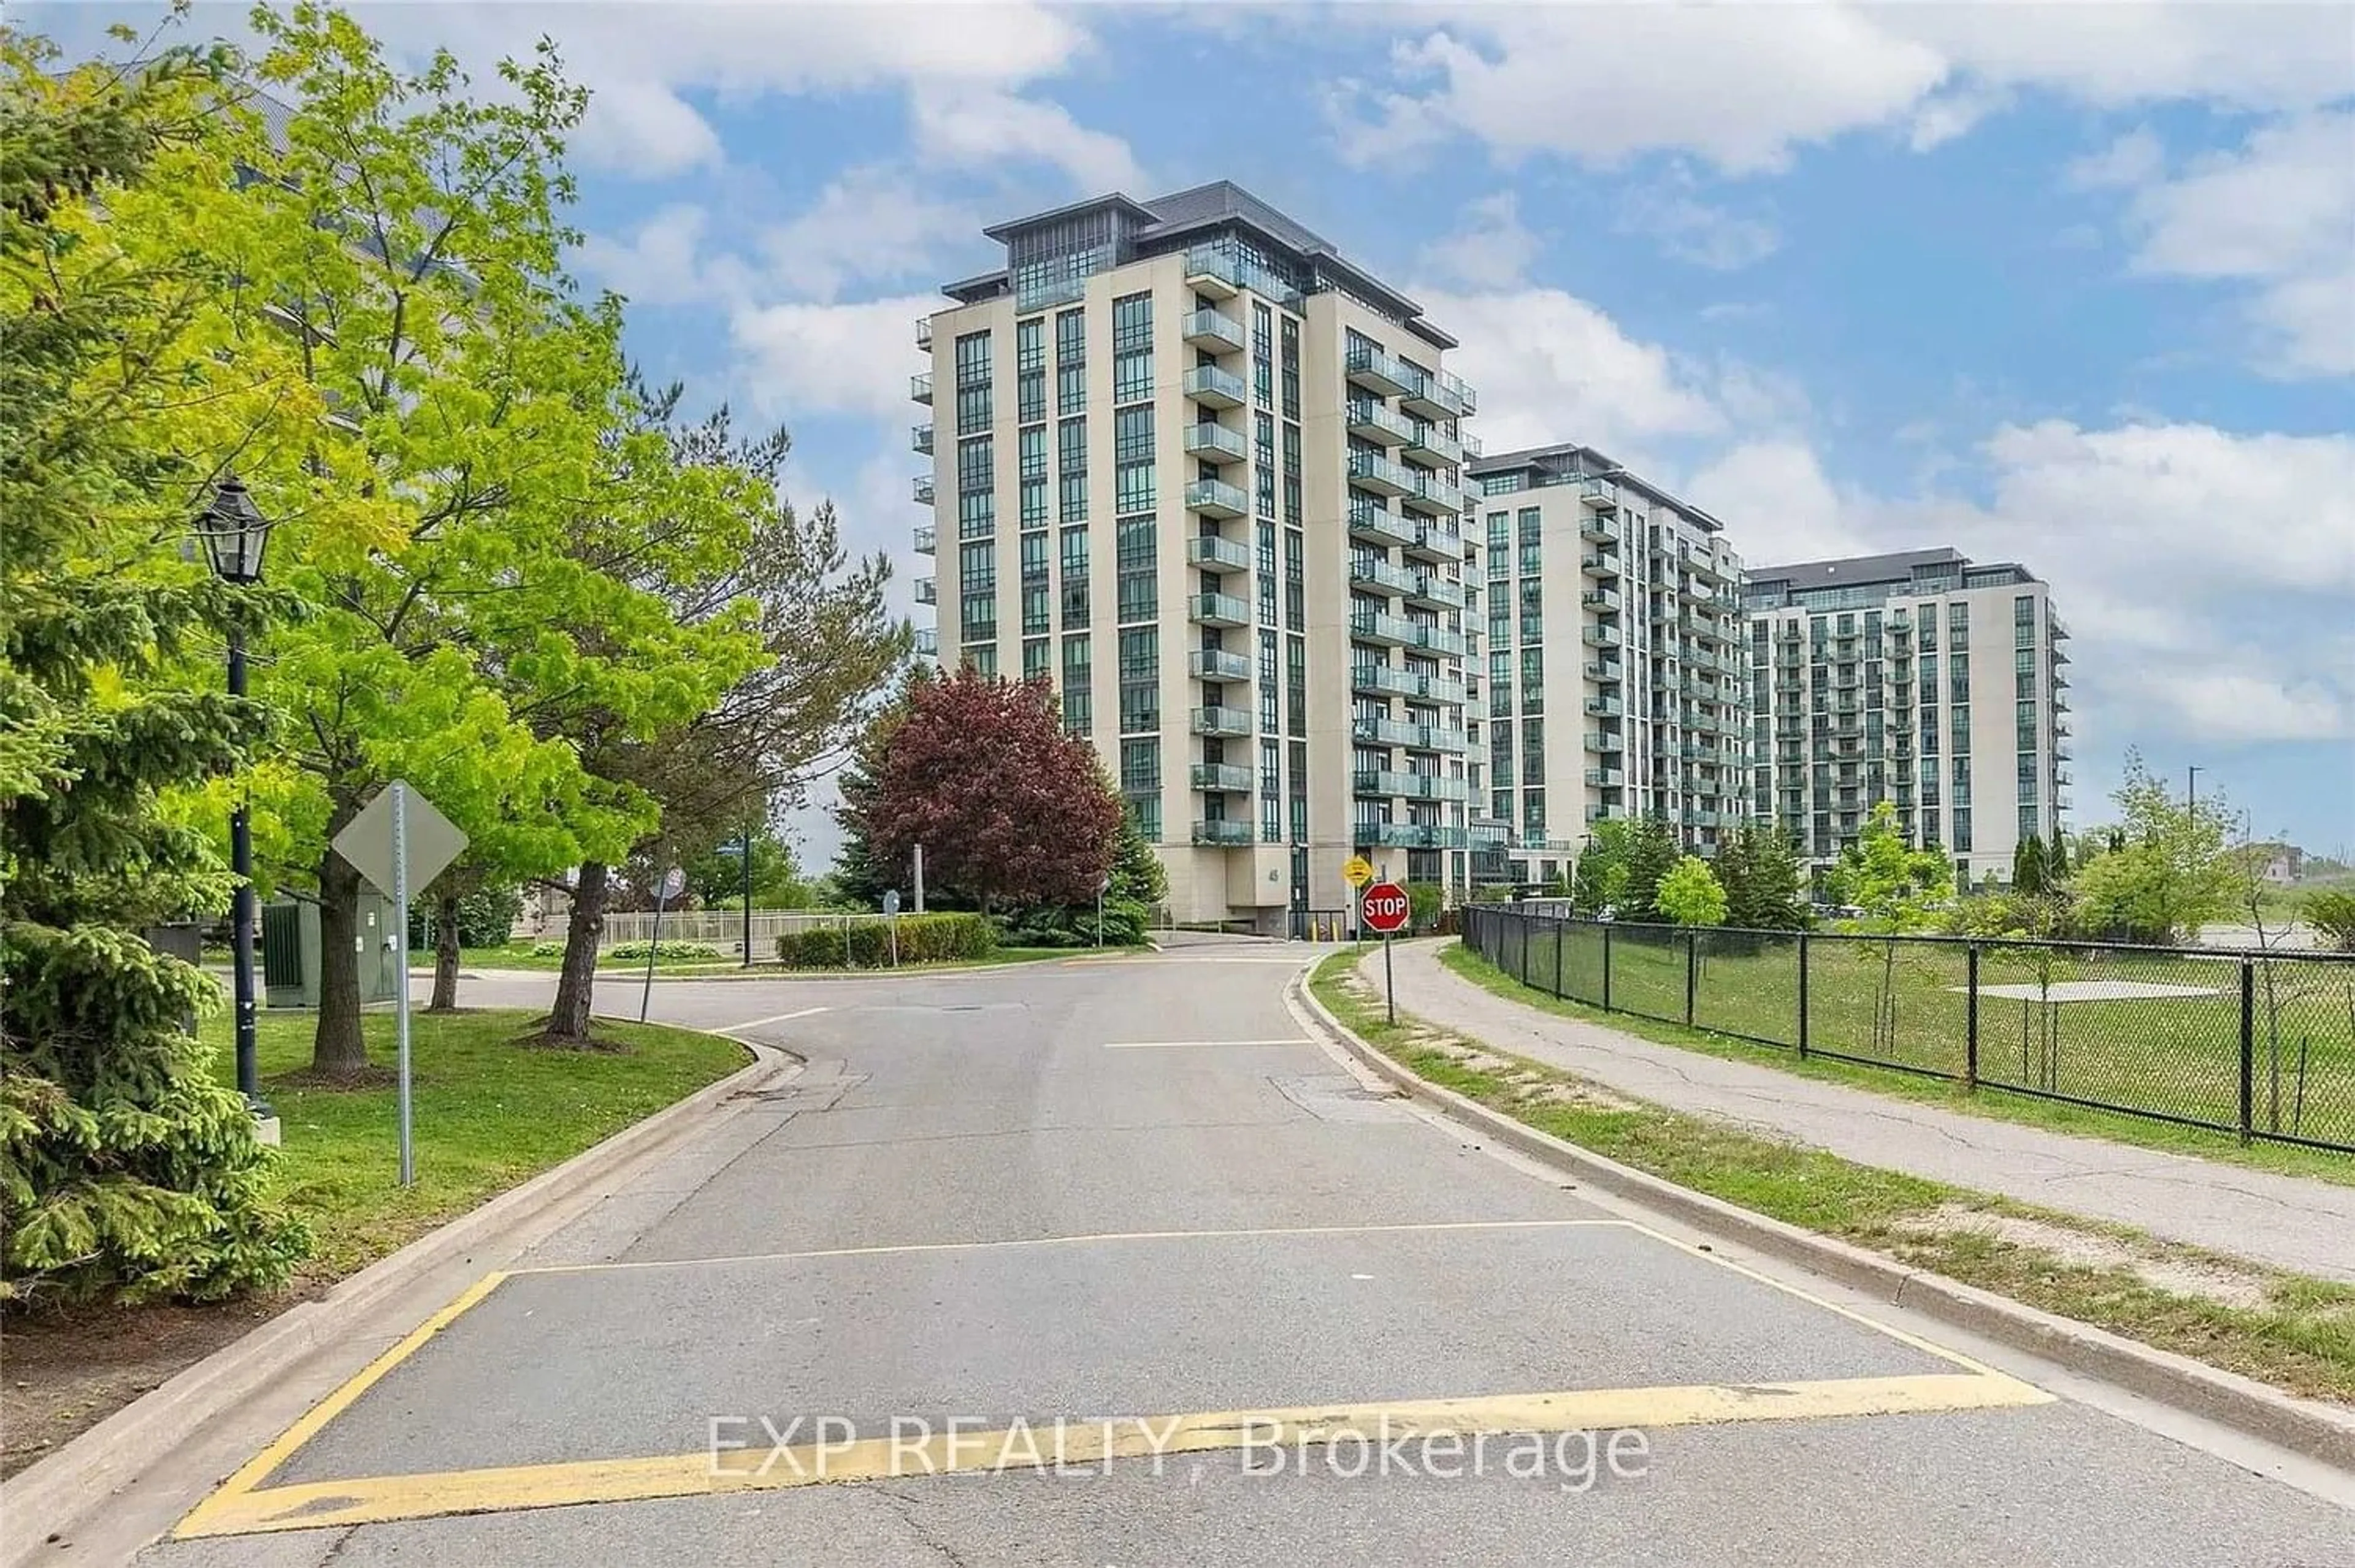 A pic from exterior of the house or condo for 45 Yorkland Blvd #503, Brampton Ontario L6P 4B4